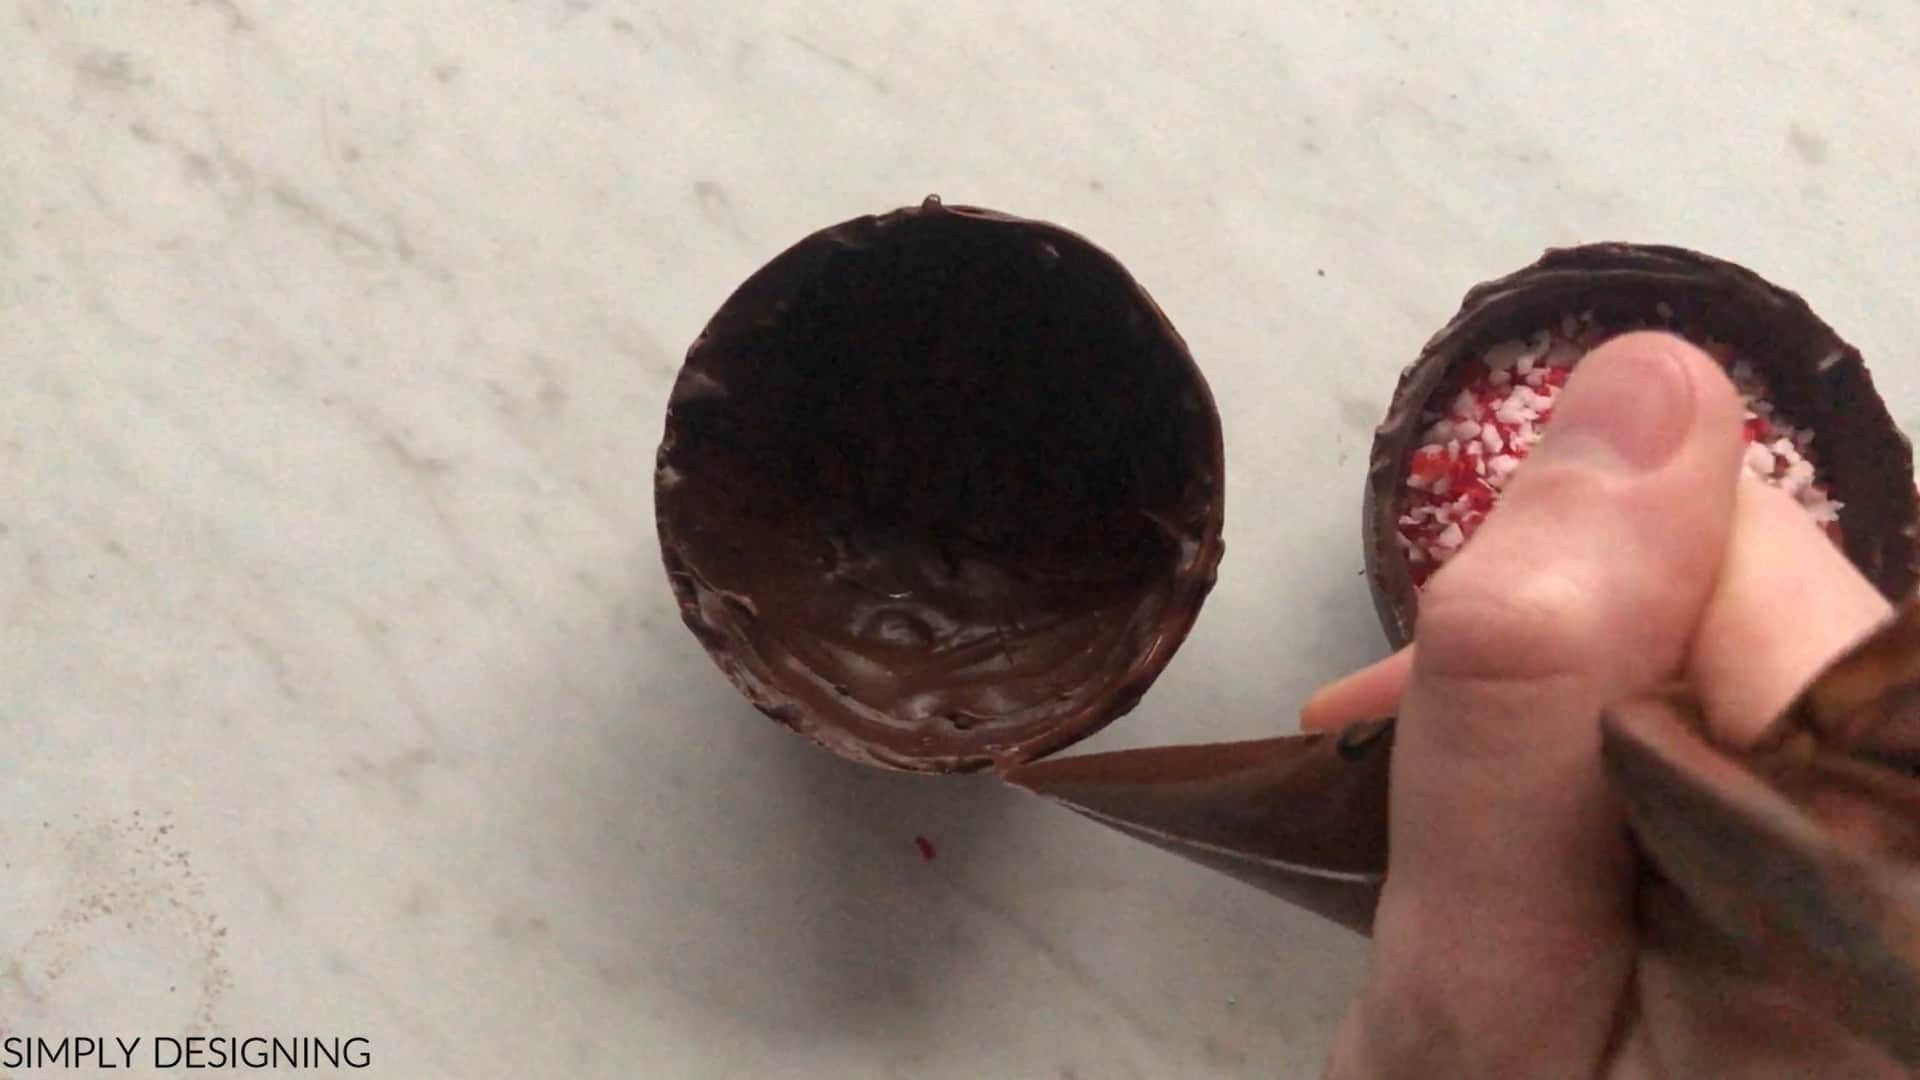 use melted chocolate to attach chocolate bomb